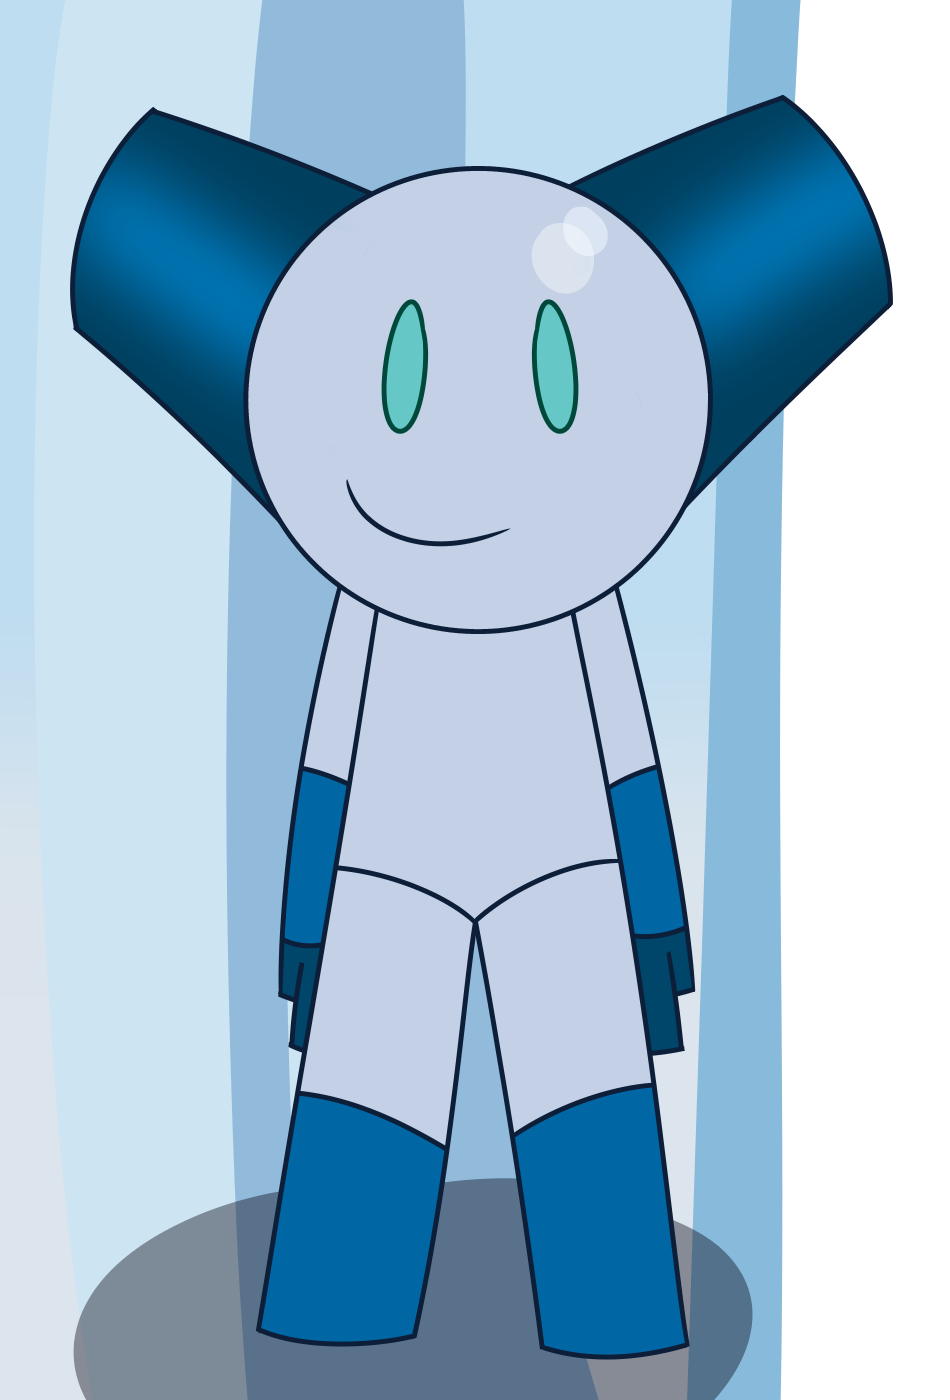 Pin by Adventure! on ️️️️Robotboy️️️️ 💙